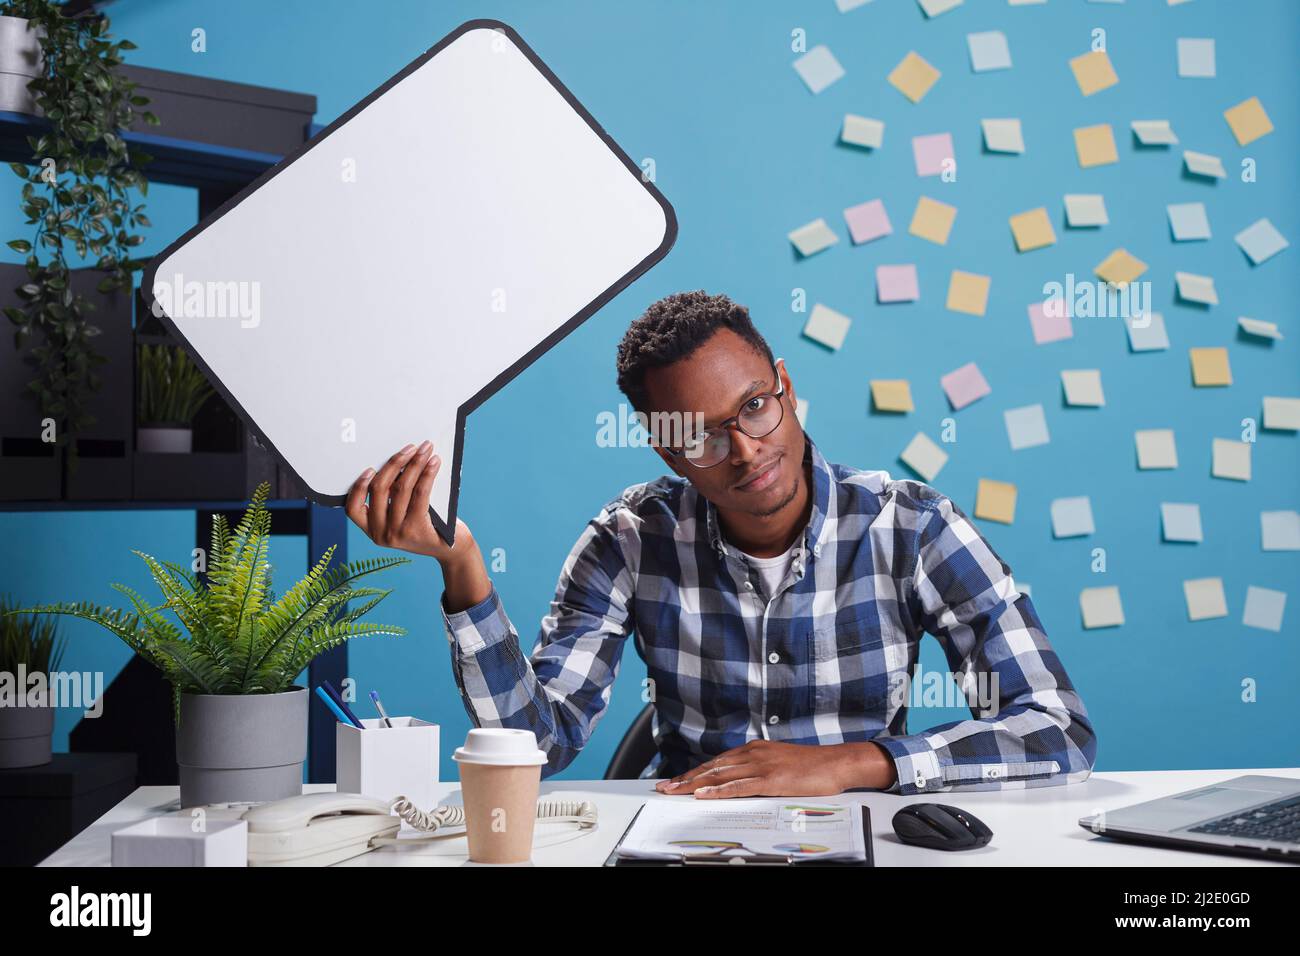 Bored office worker holding cardboard speech bubble sign above head while sitting in company workspace. Business development agency employee with speech bubble sign overhead. Stock Photo